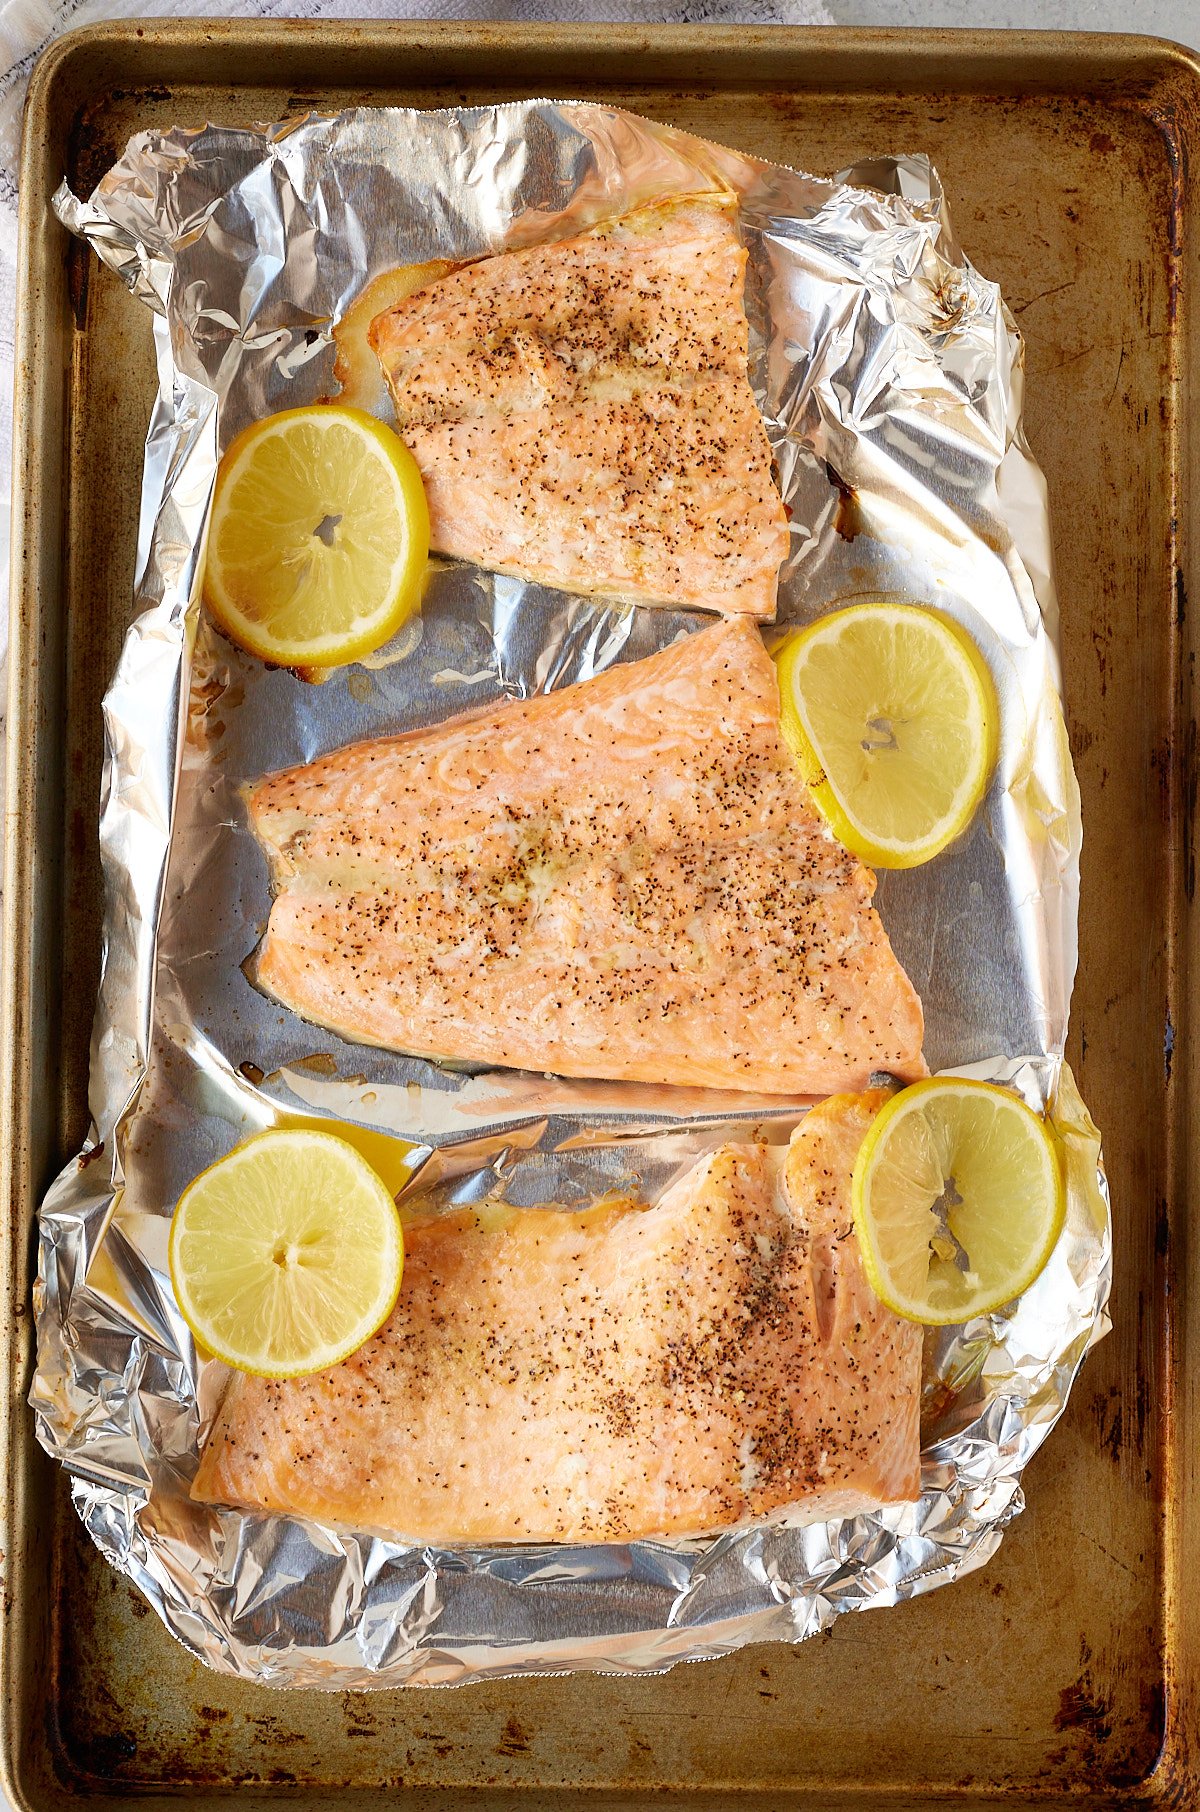 Oven baked salmon fillets on a lined baking tray.